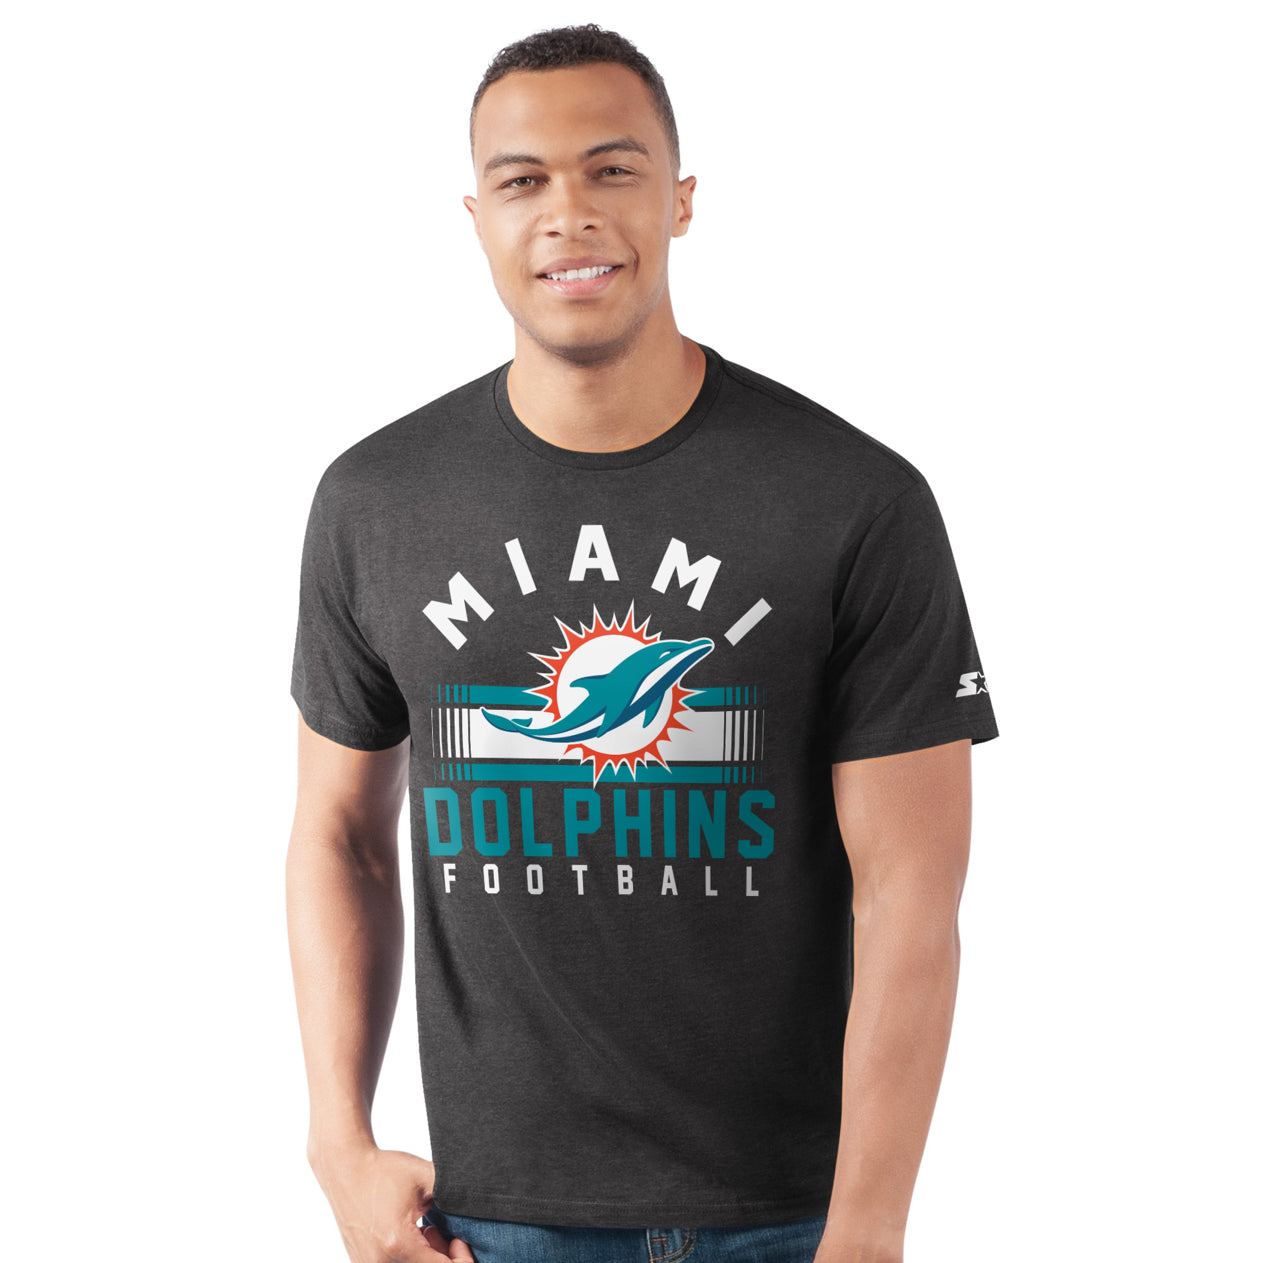 Miami Dolphins Starter Hashmark T-Shirt - Charcoal Grey